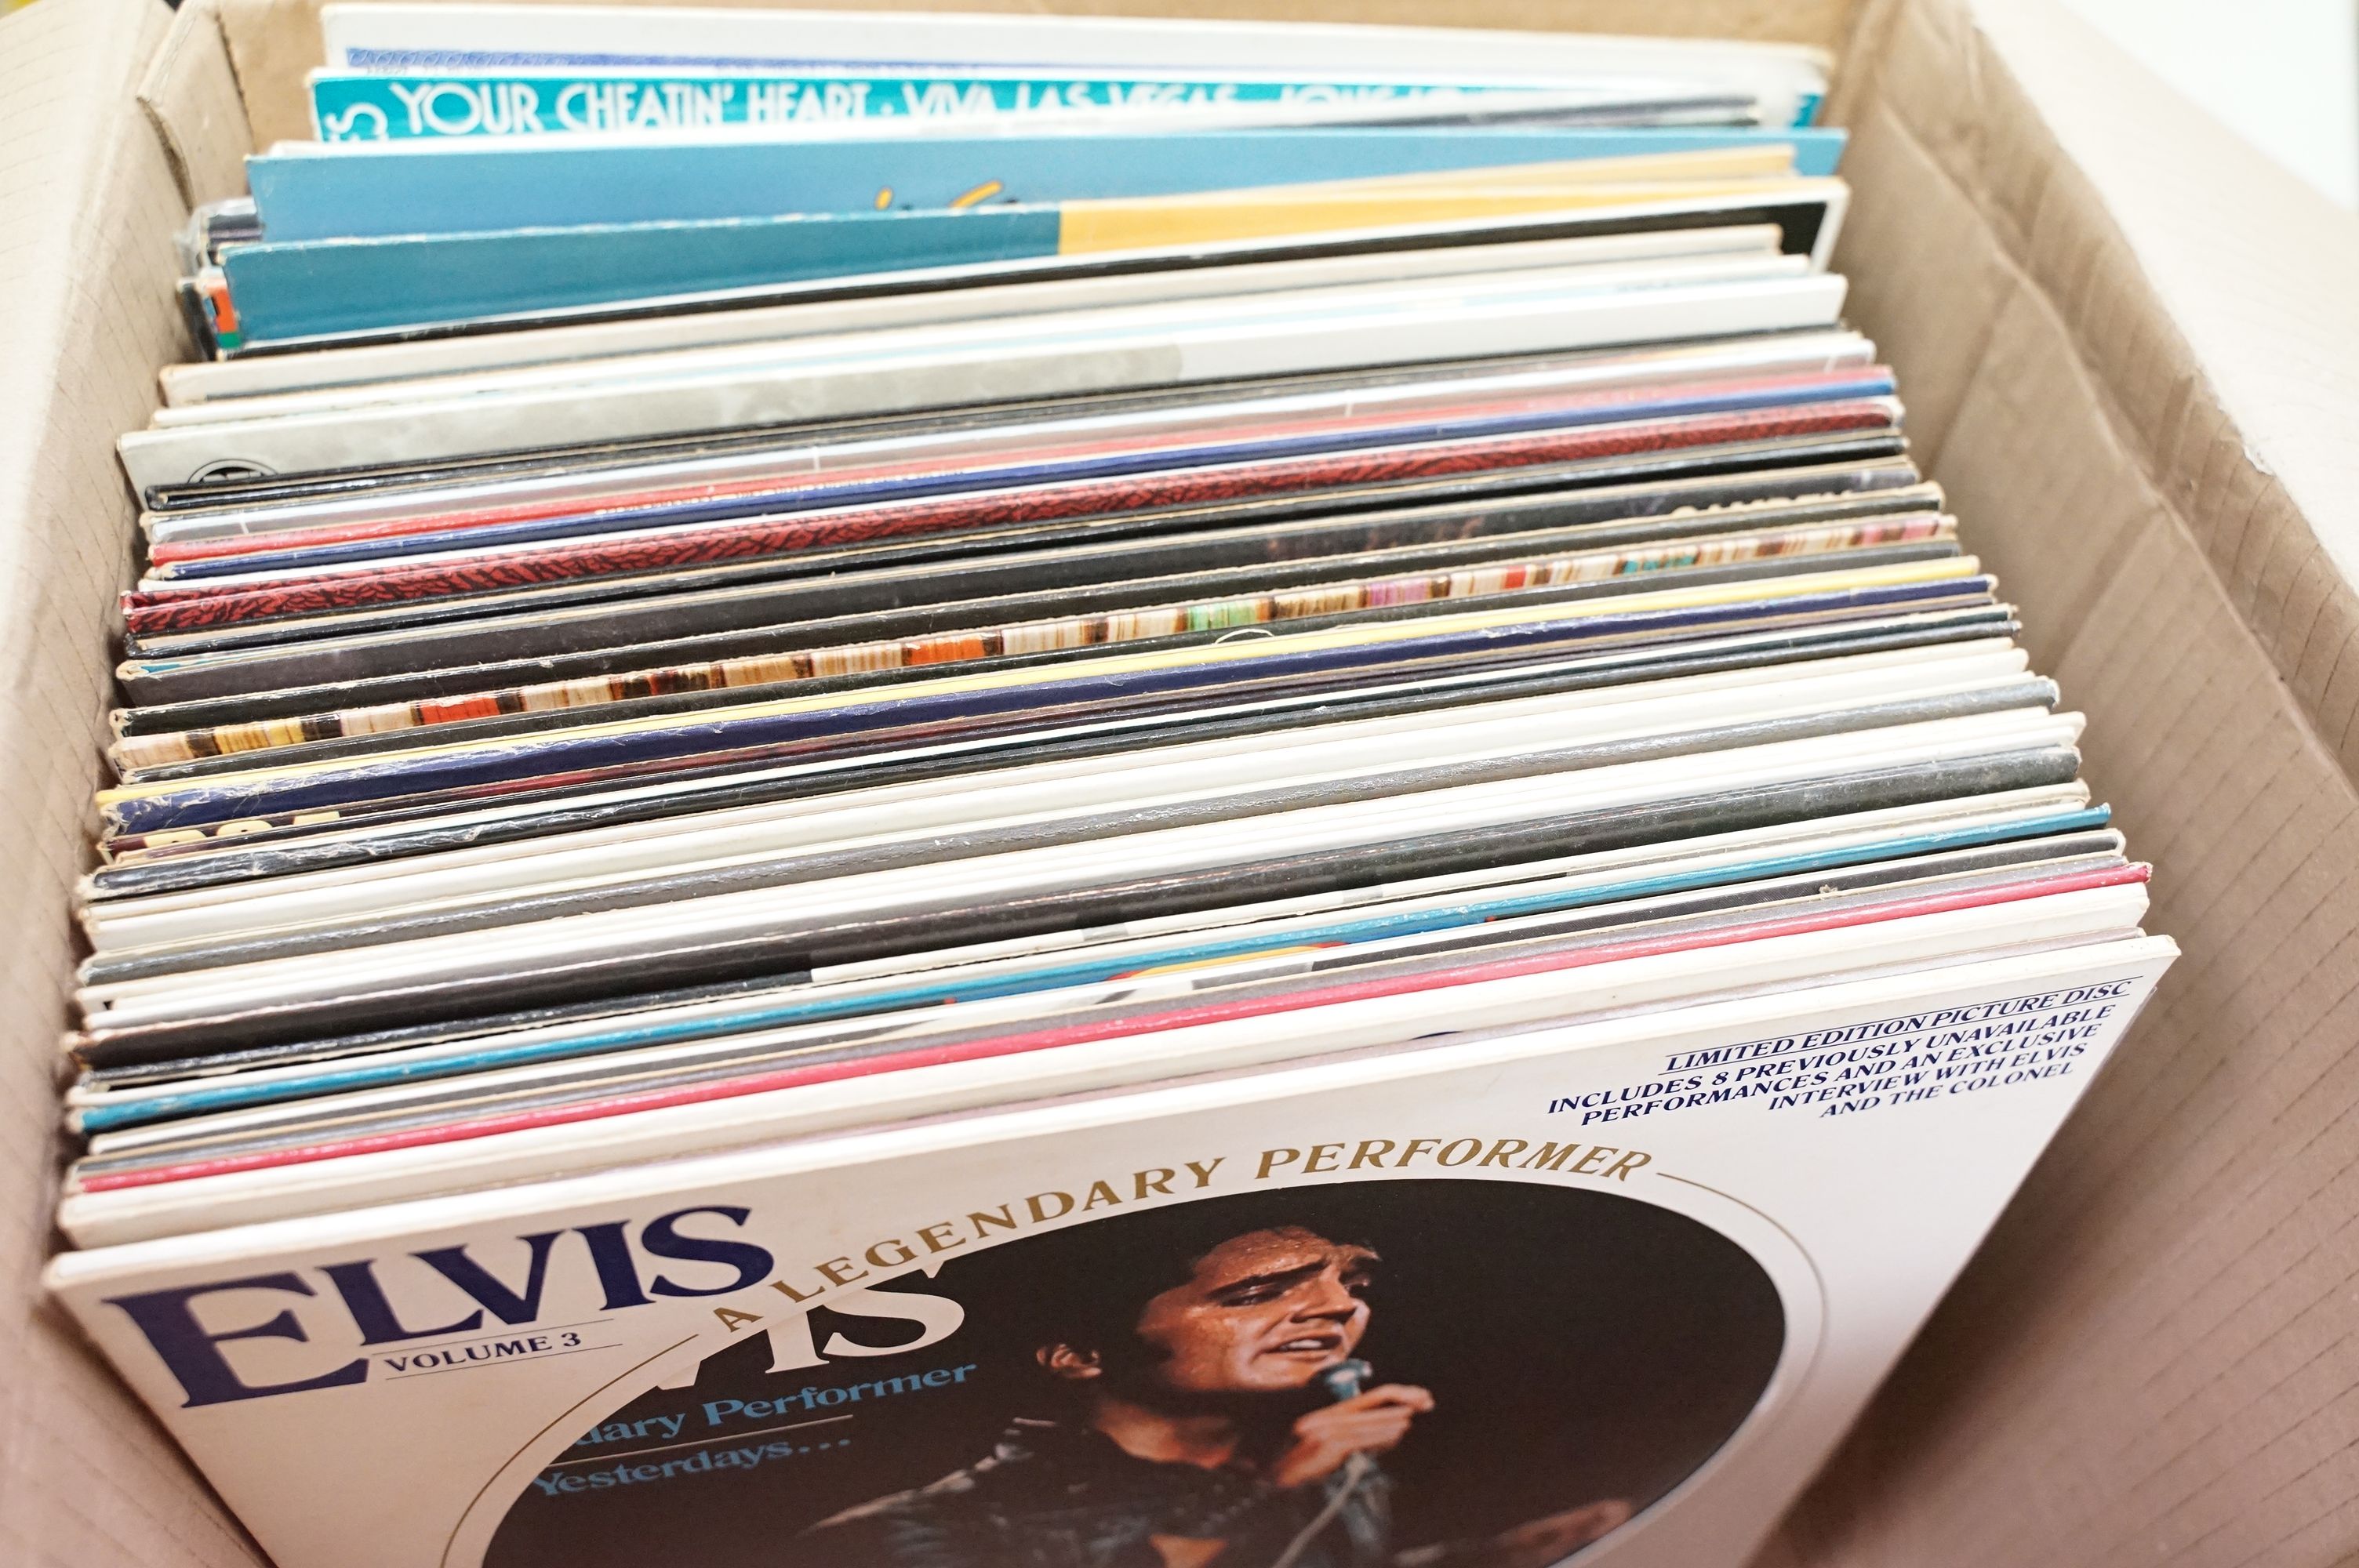 Vinyl - Over 80 Elvis Presley LPs spanning his career including foreign pressings, ltd editions - Image 5 of 5